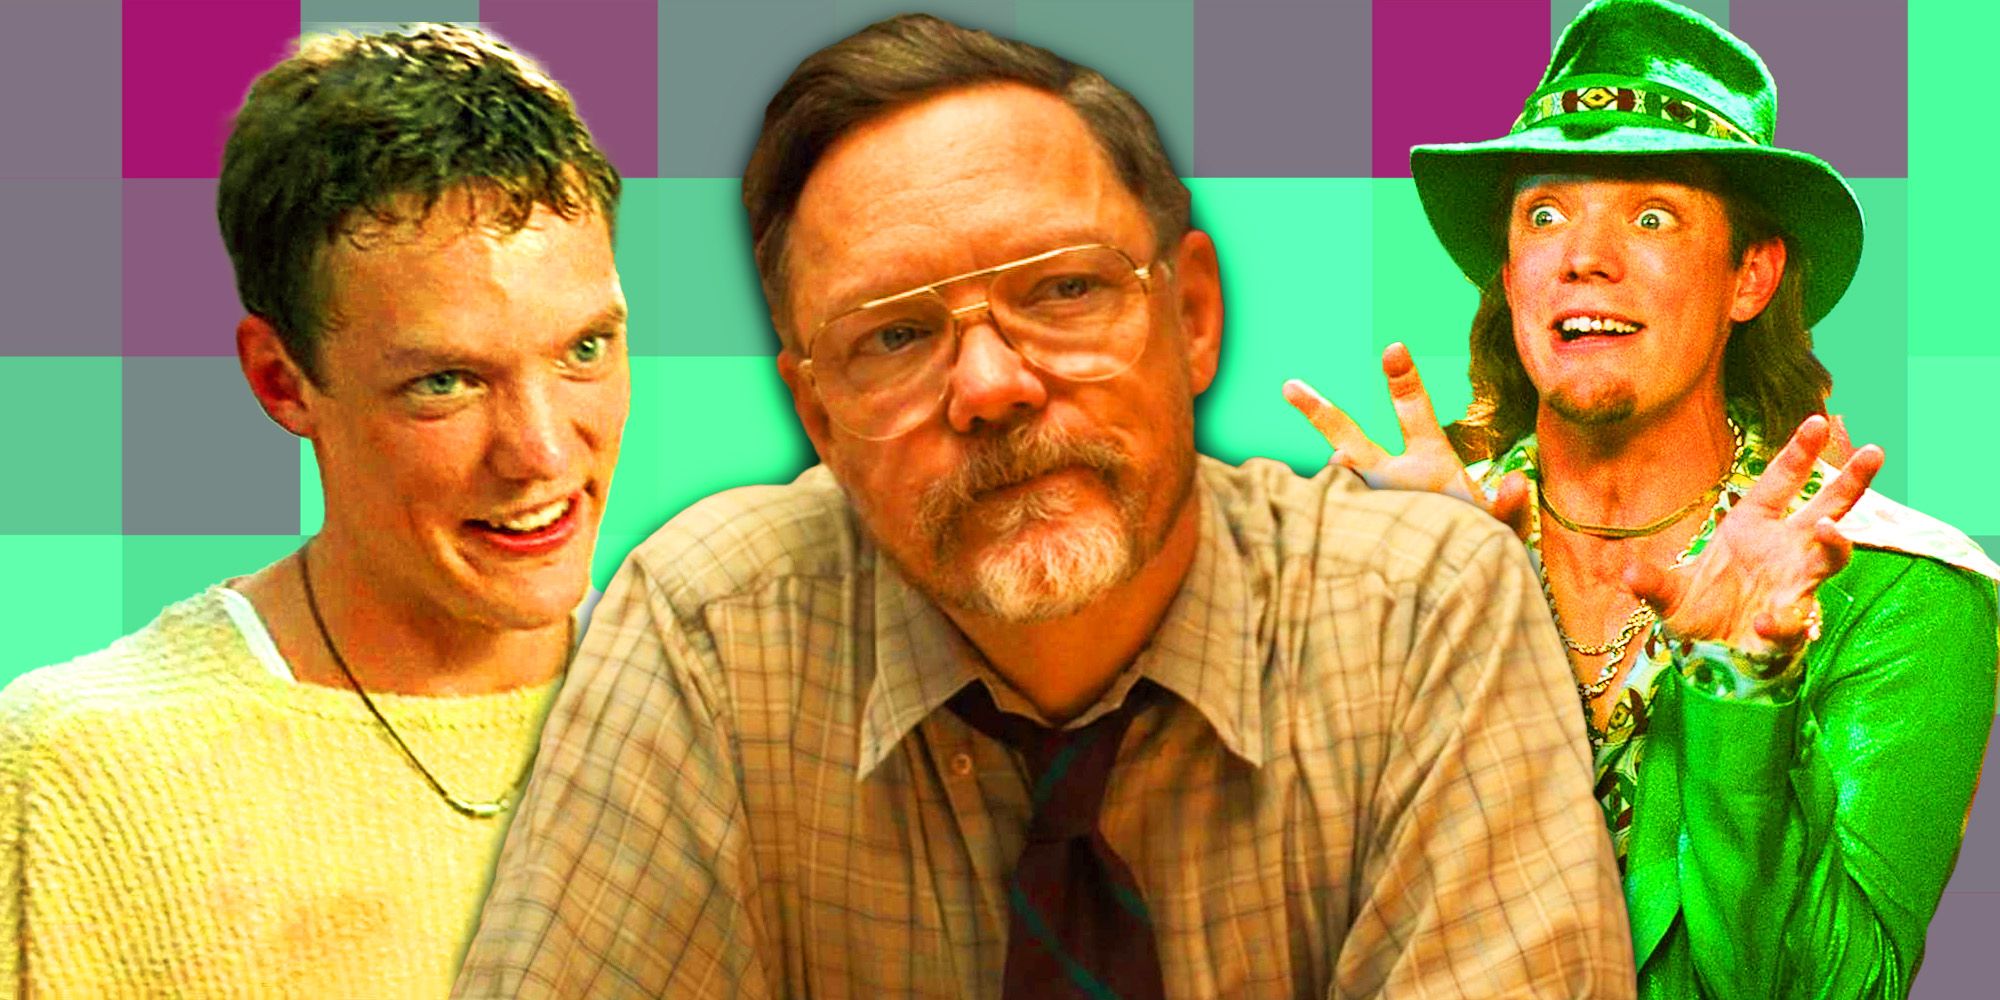 Matthew Lillard as Stu Macher in Scream as William Afton in Five Nights at Freddys and as Shaggy in Scooby Doo 2